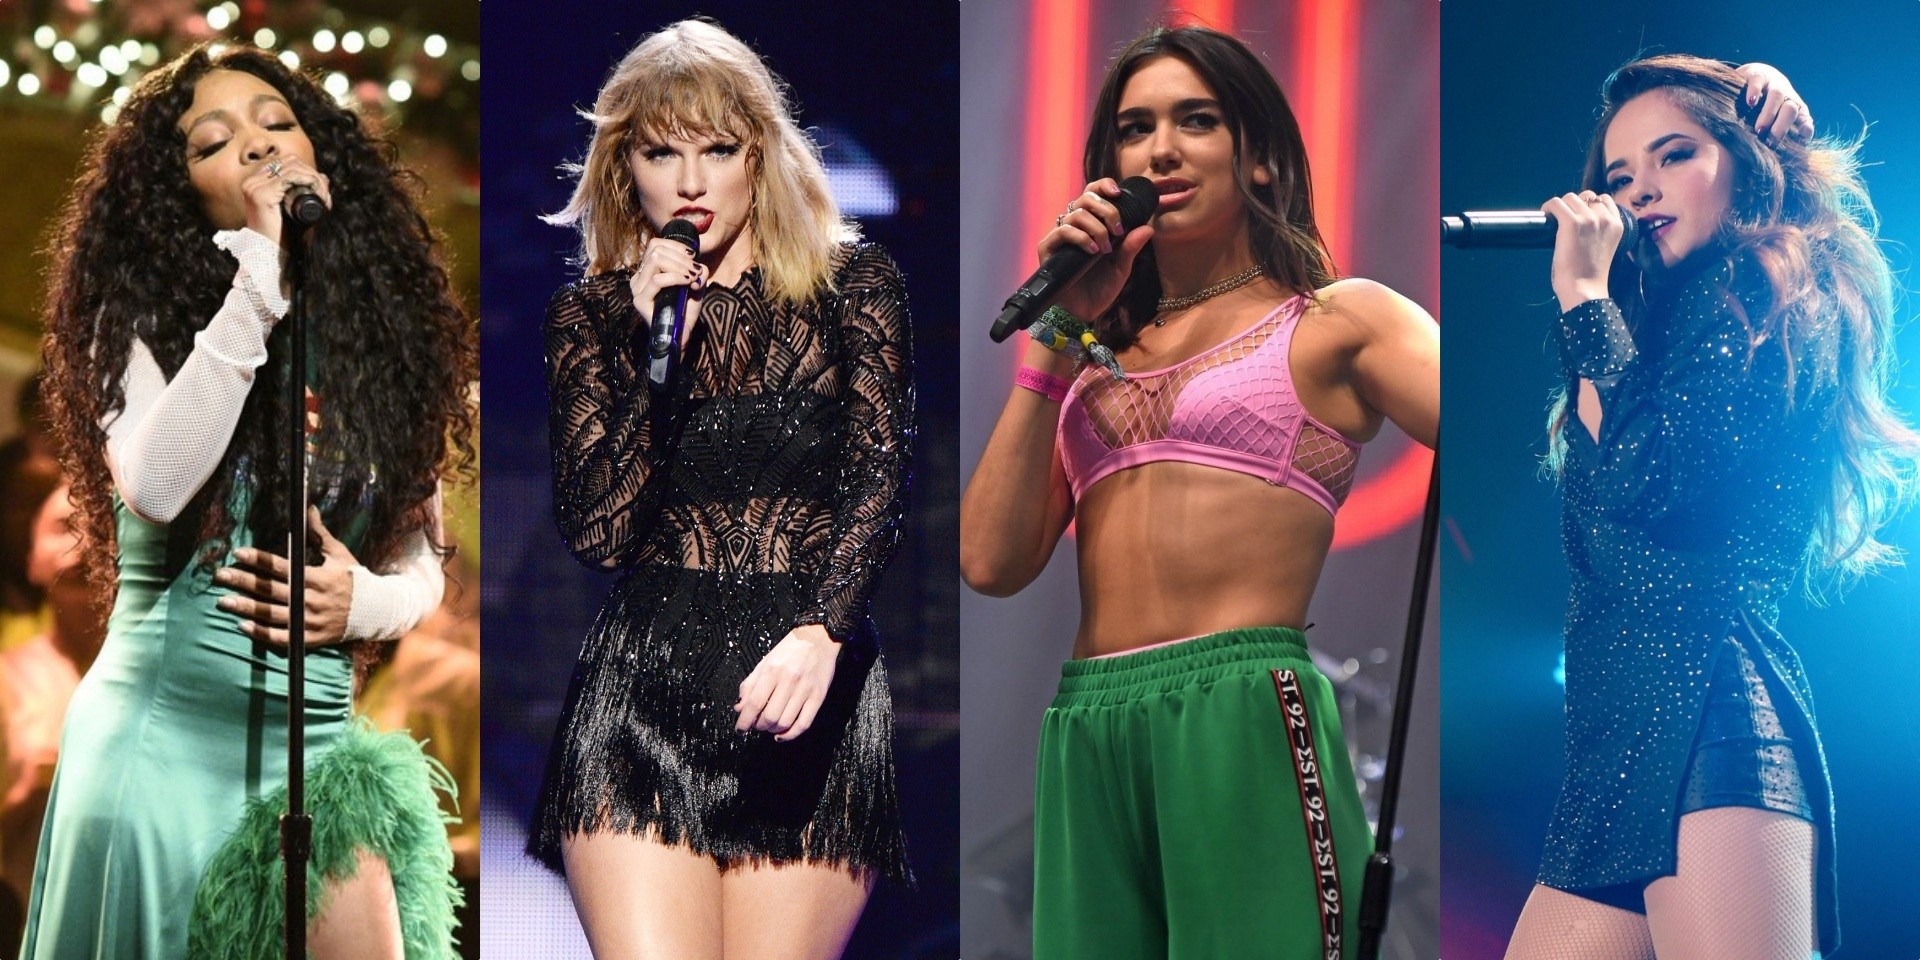 Taylor Swift to headline Amazon Music's Prime Day Concert, supported by Dua Lipa, SZA, and Becky G